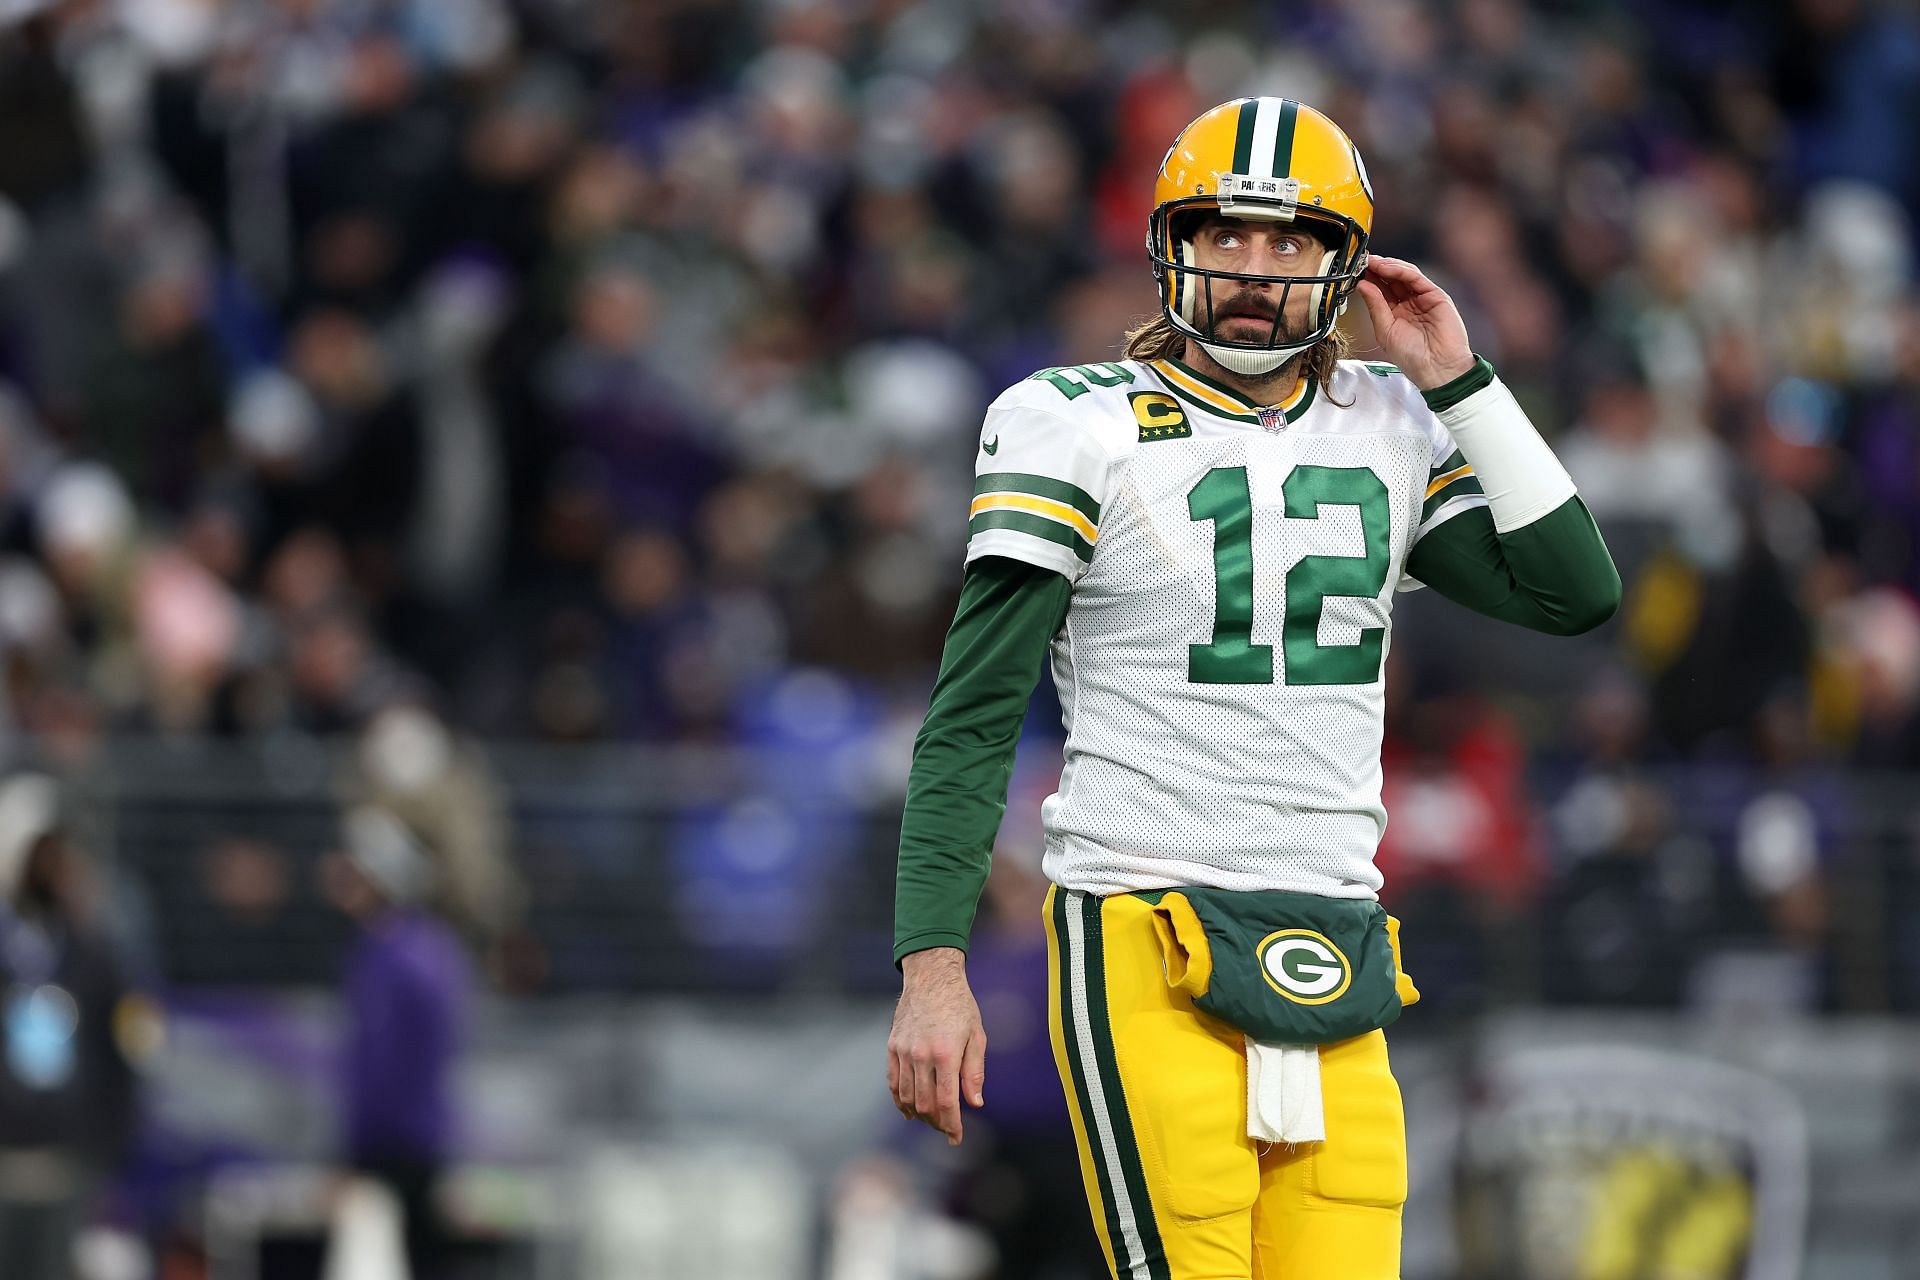 Colin Cowherd sees no way Aaron Rodgers finishes his current contract in Green Bay